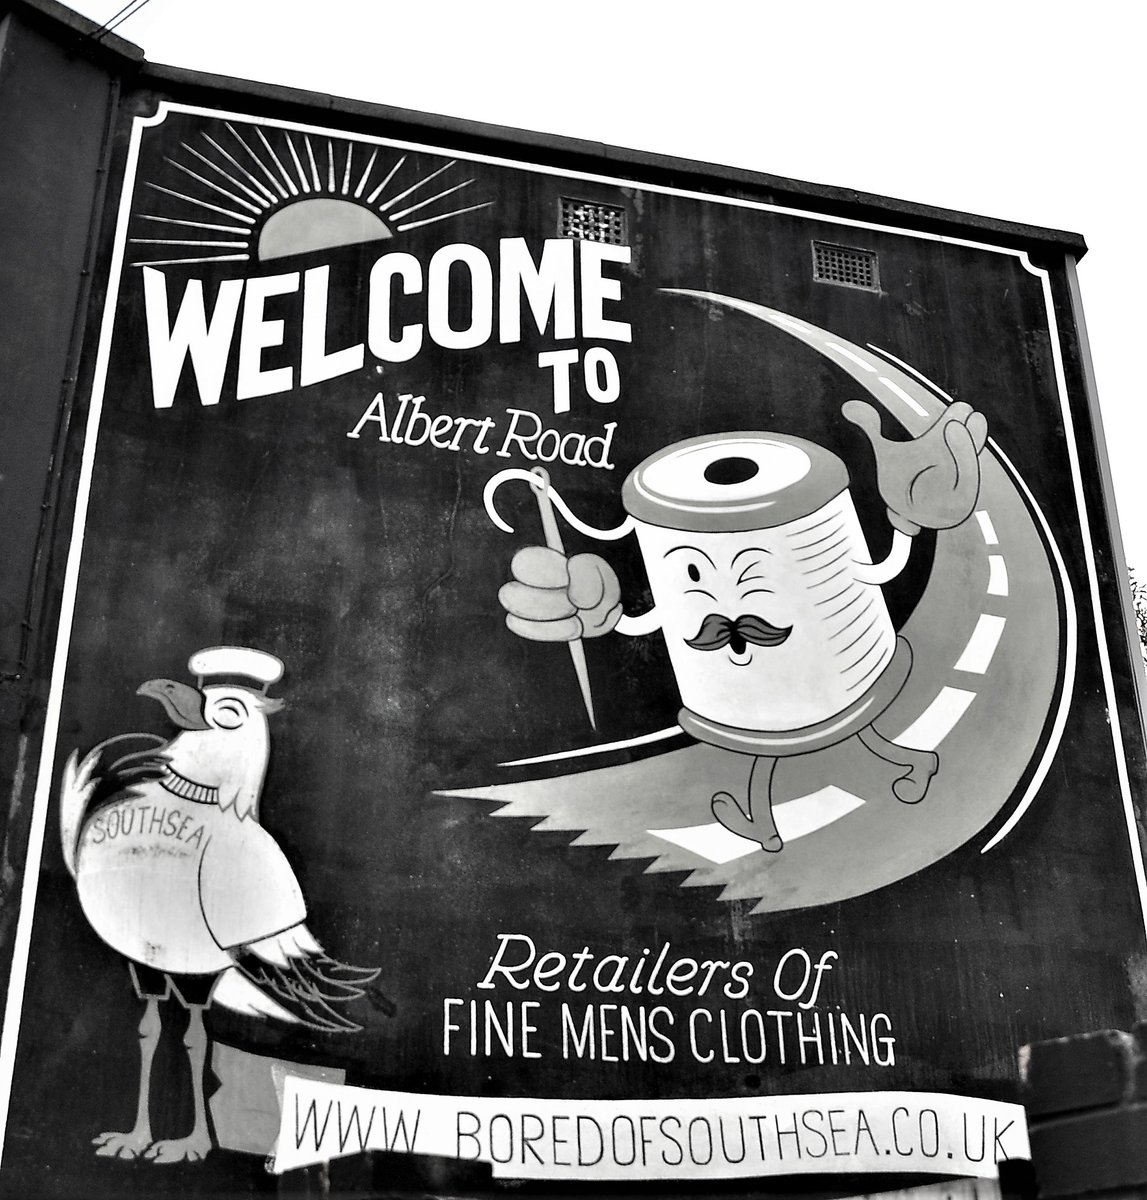 Albert Road in Southsea is a great street with eclectic shops, restaurants and bars. #southsea #albertroad #bnw_captures #bnwphotography #bnw #blackandwhitephotography #blackandwhite #Monochrome #Portsmouth #advert #mural #art #StreetArt #streetphotography